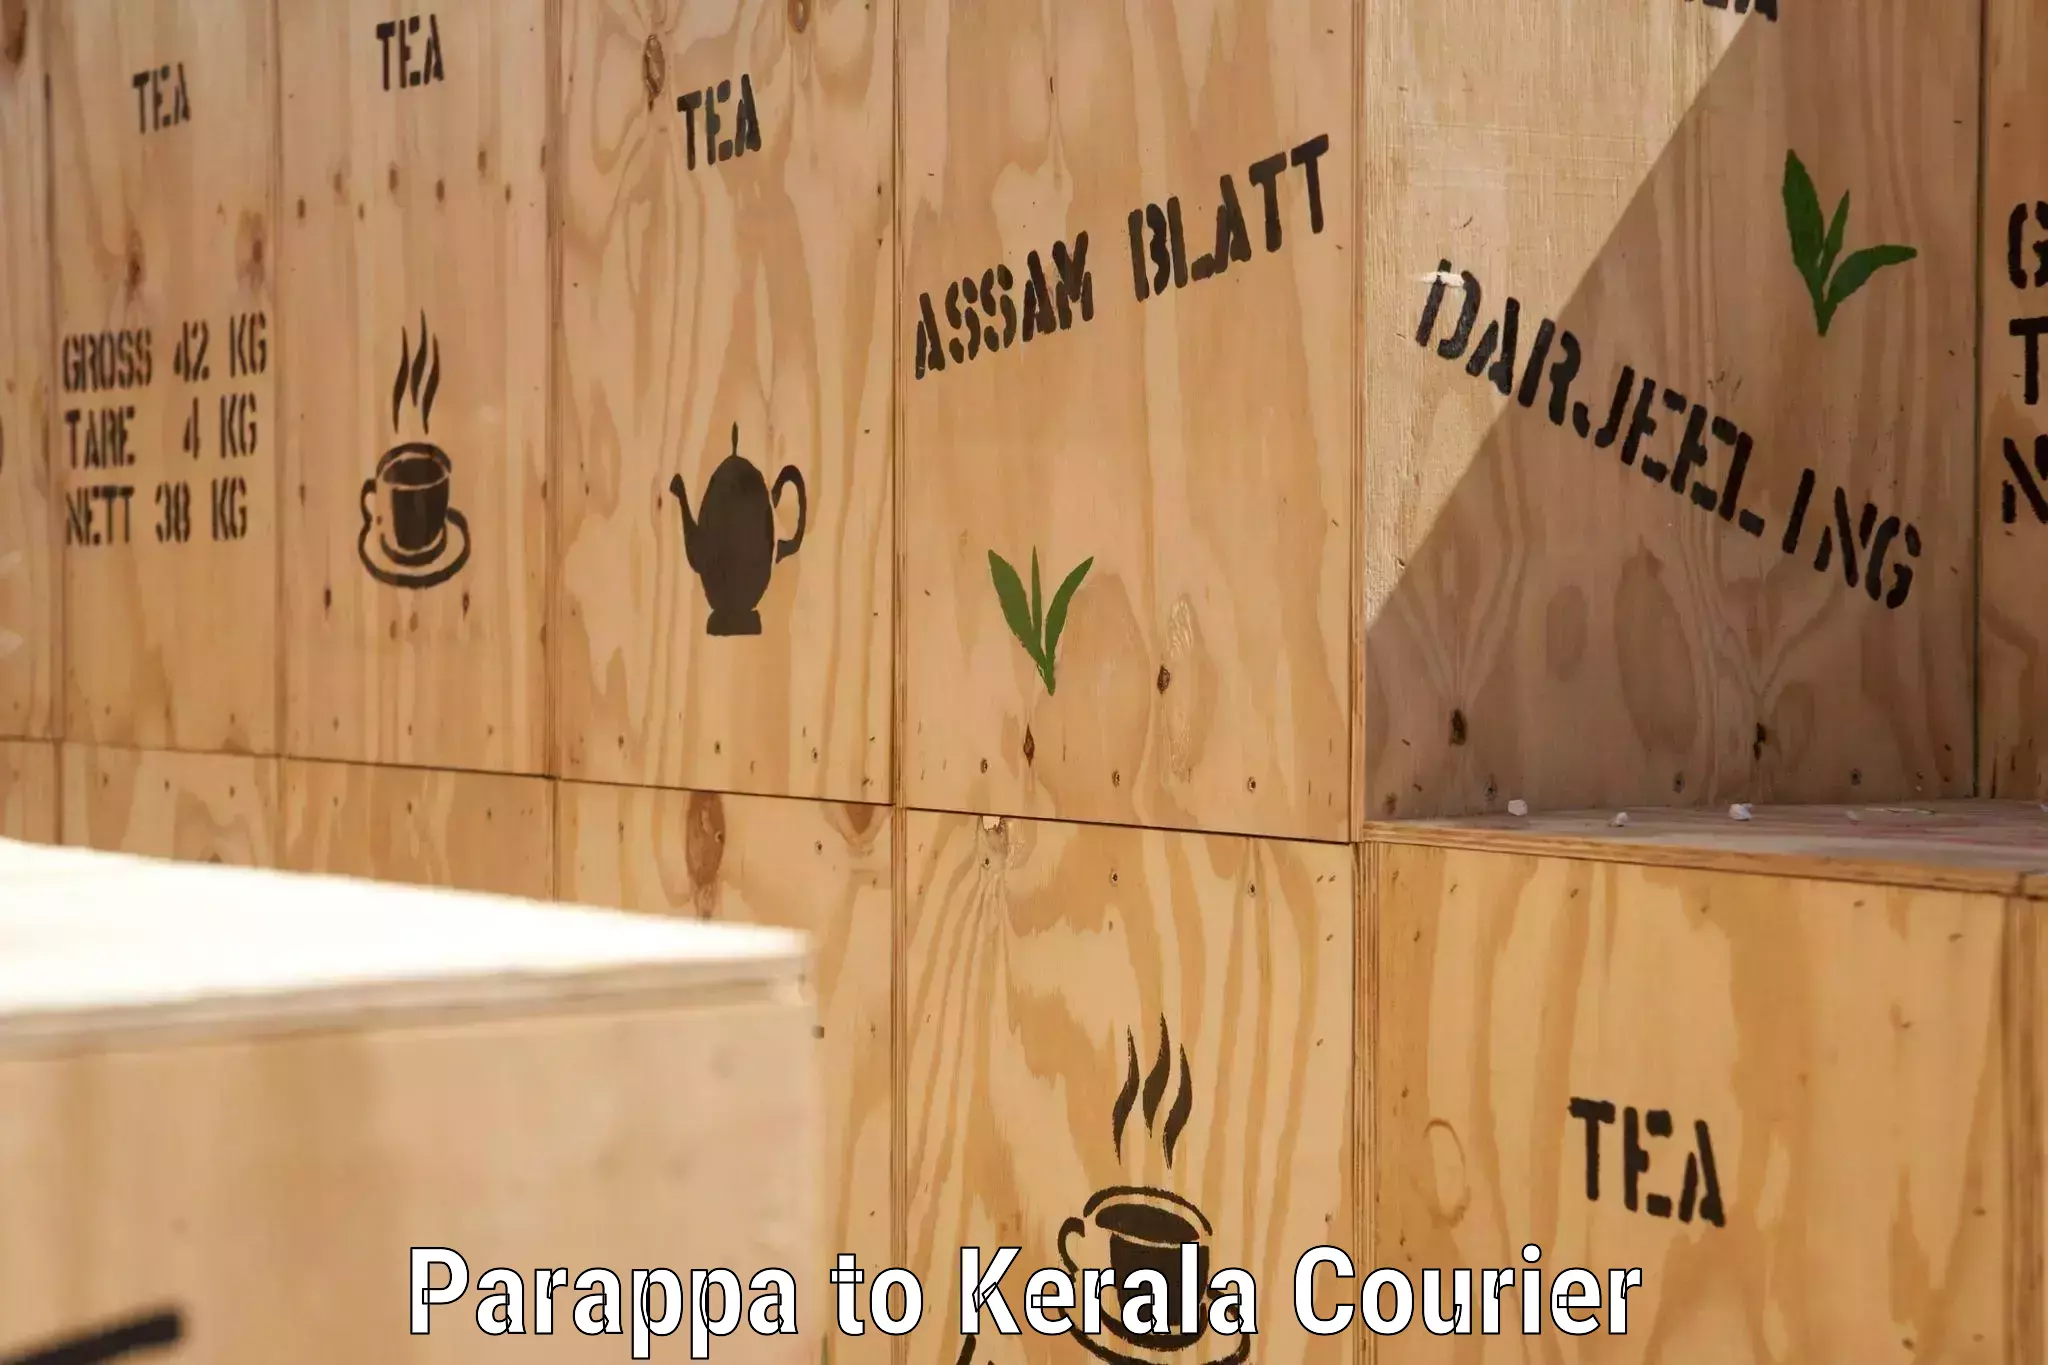 State-of-the-art courier technology in Parappa to Cochin Port Kochi